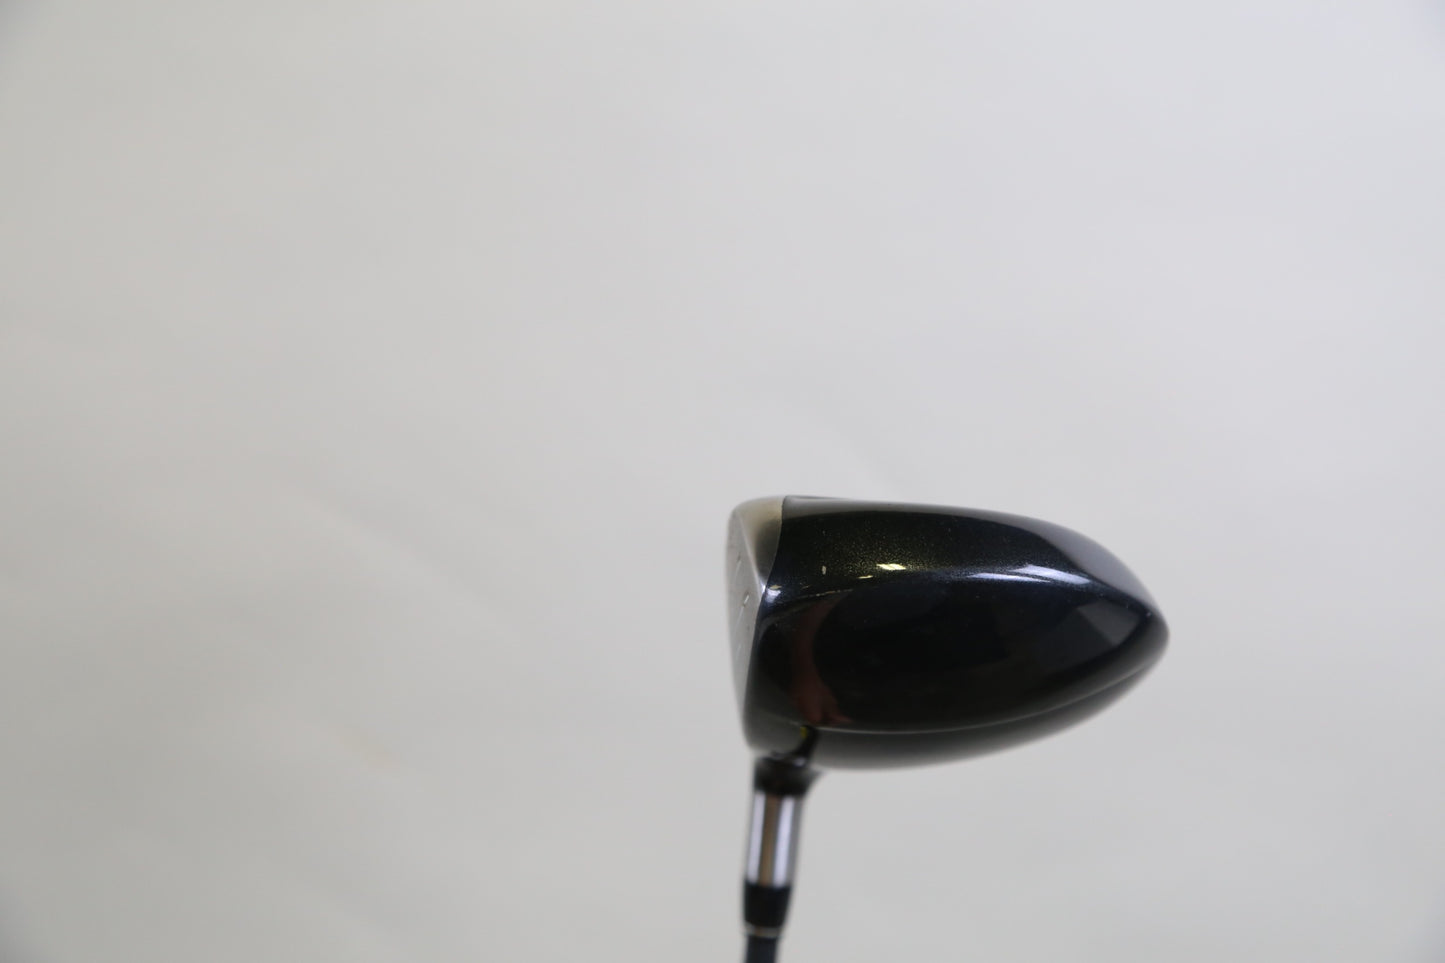 Used TaylorMade 320 Driver - Right-Handed - 10.5 Degrees - Stiff Flex-Next Round